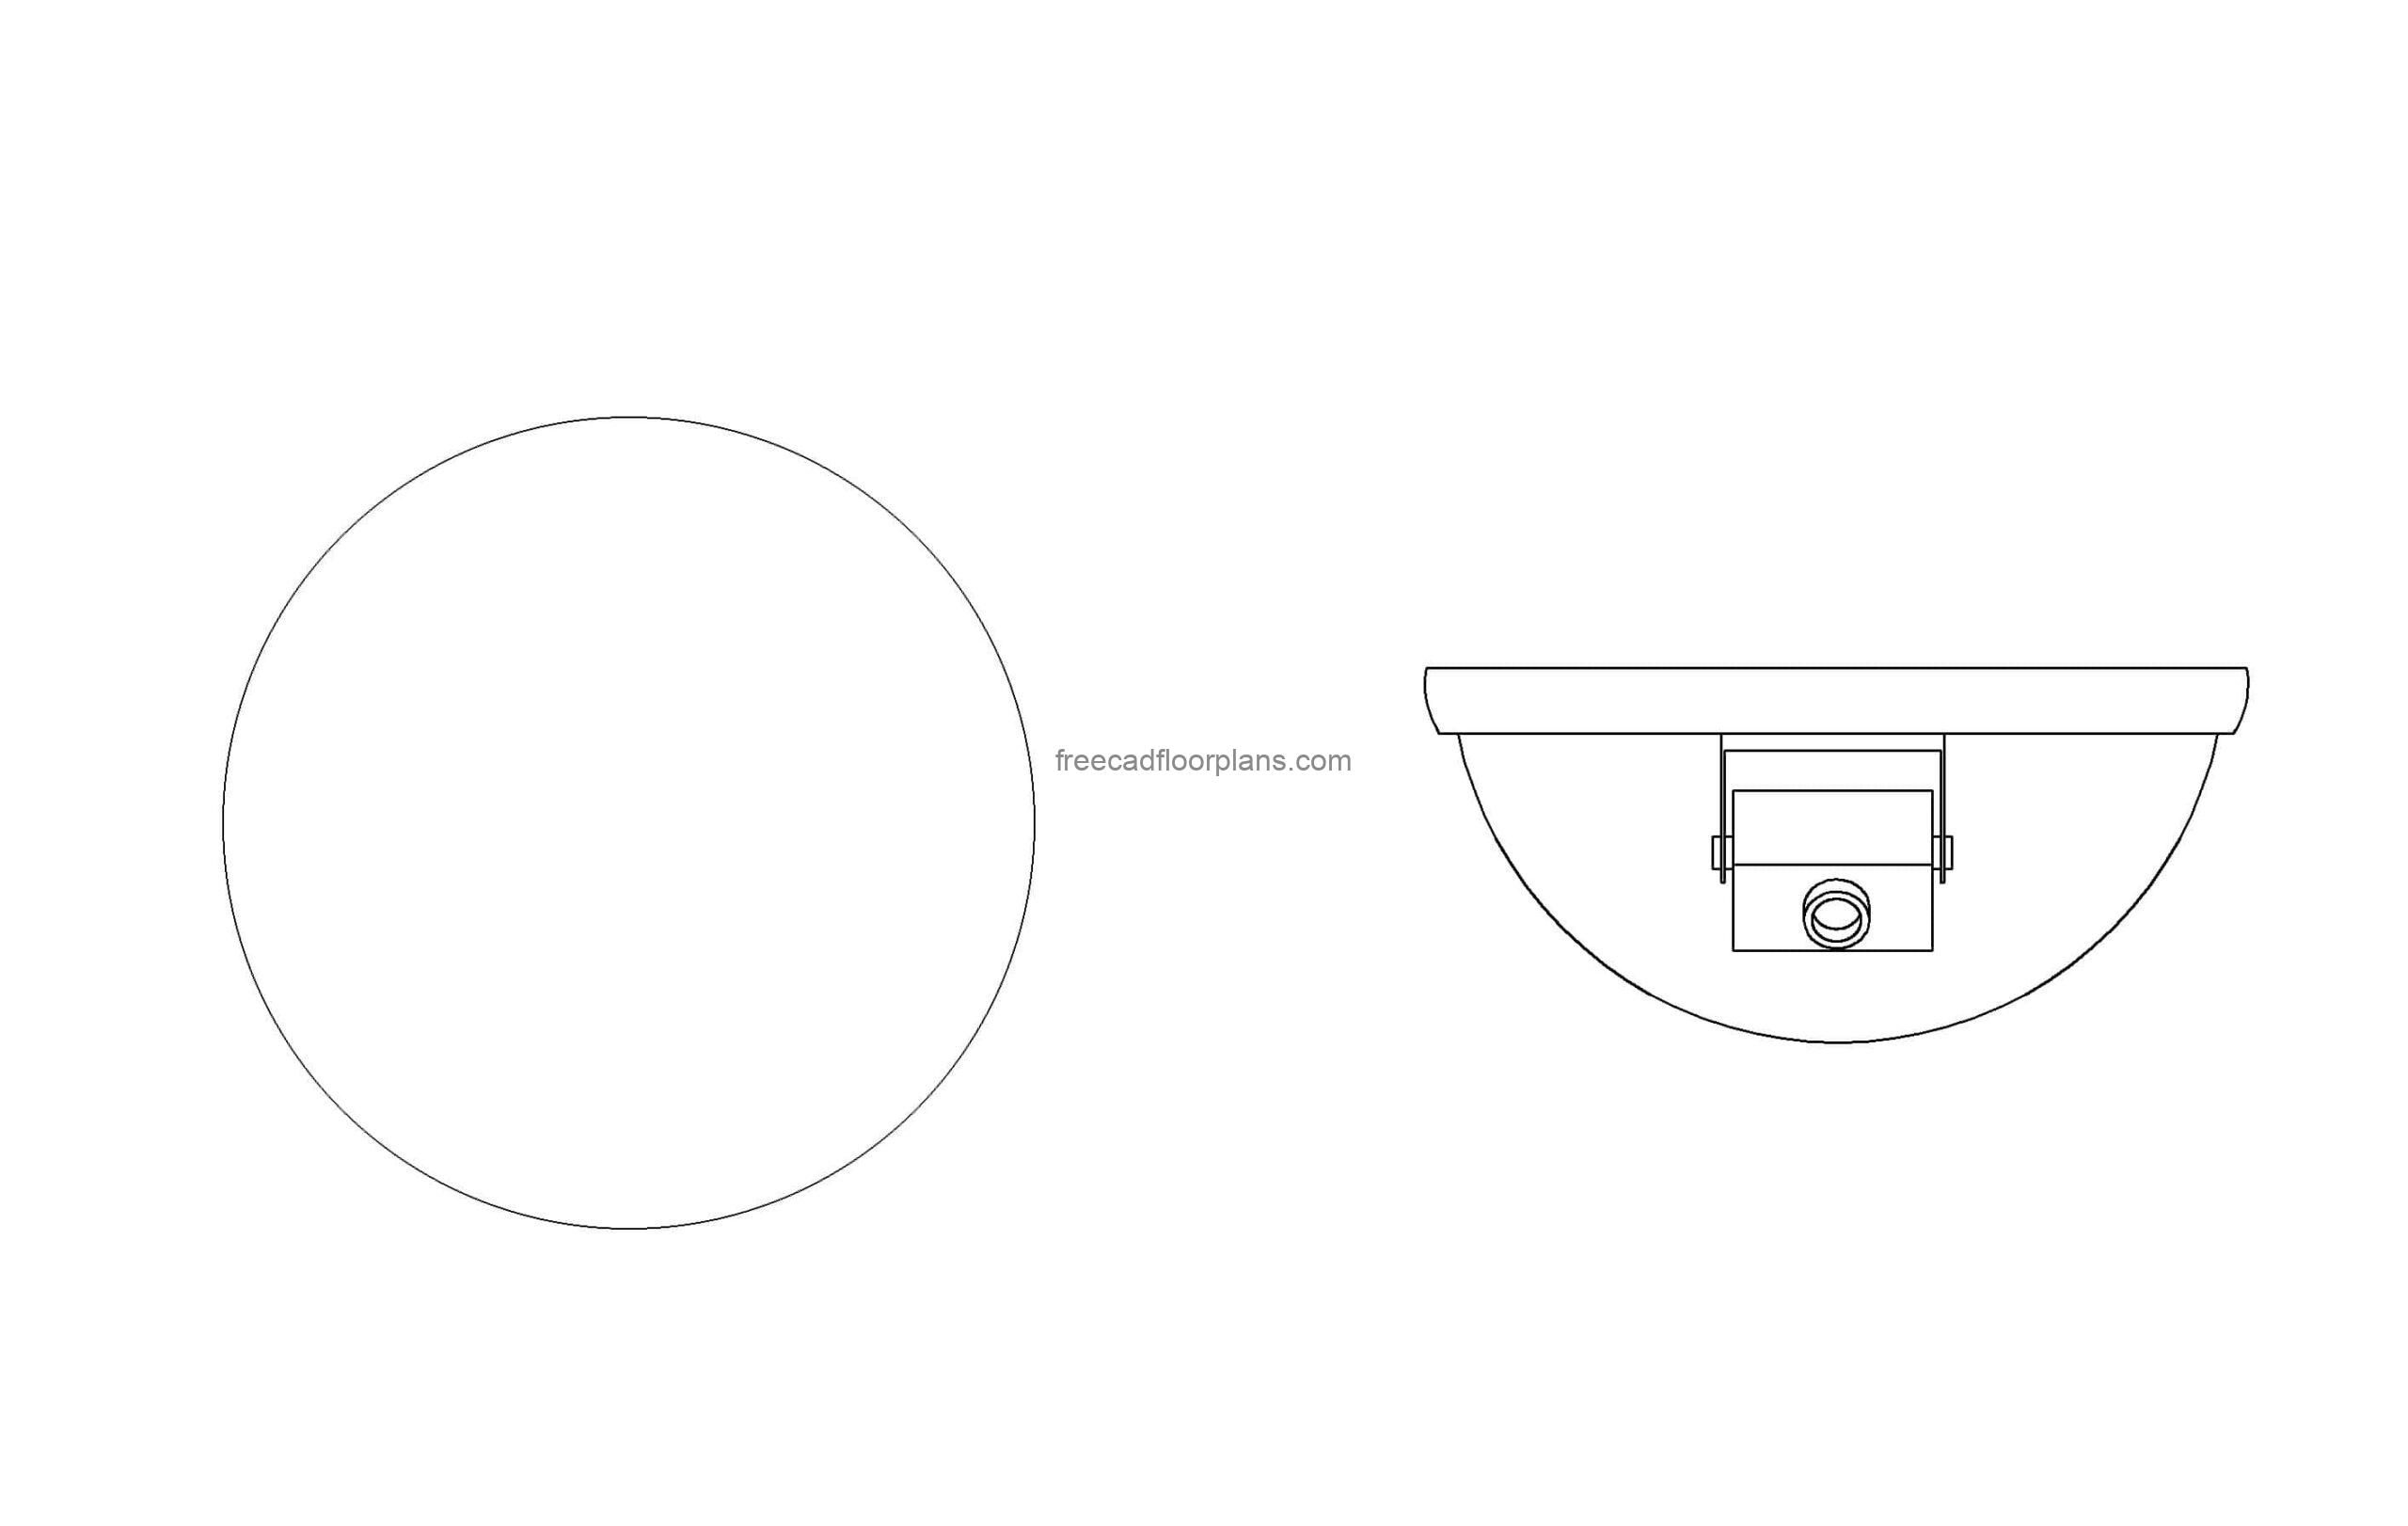 autocad drawing of a Recessed dome CCTV camera 2d plan and elevation views, dwg file for free download